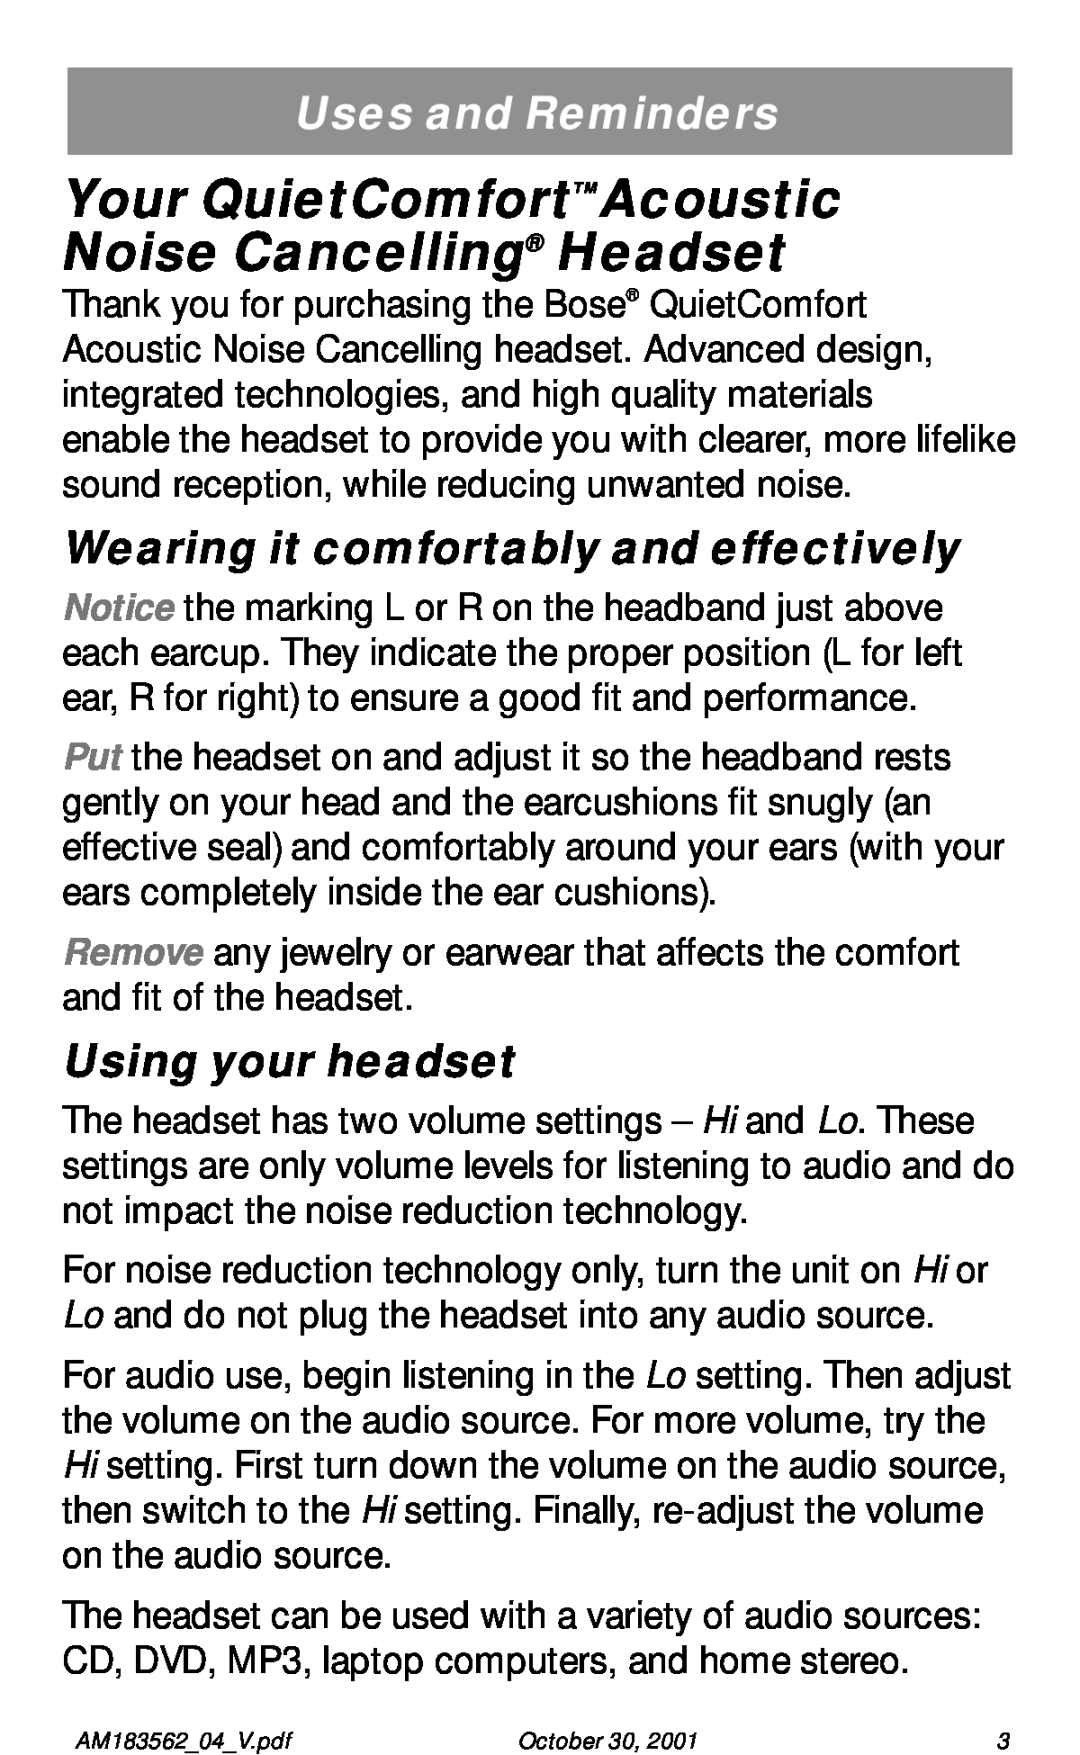 Bose Acoustic Noise Cancelling Headset Uses and Reminders, Wearing it comfortably and effectively, Using your headset 